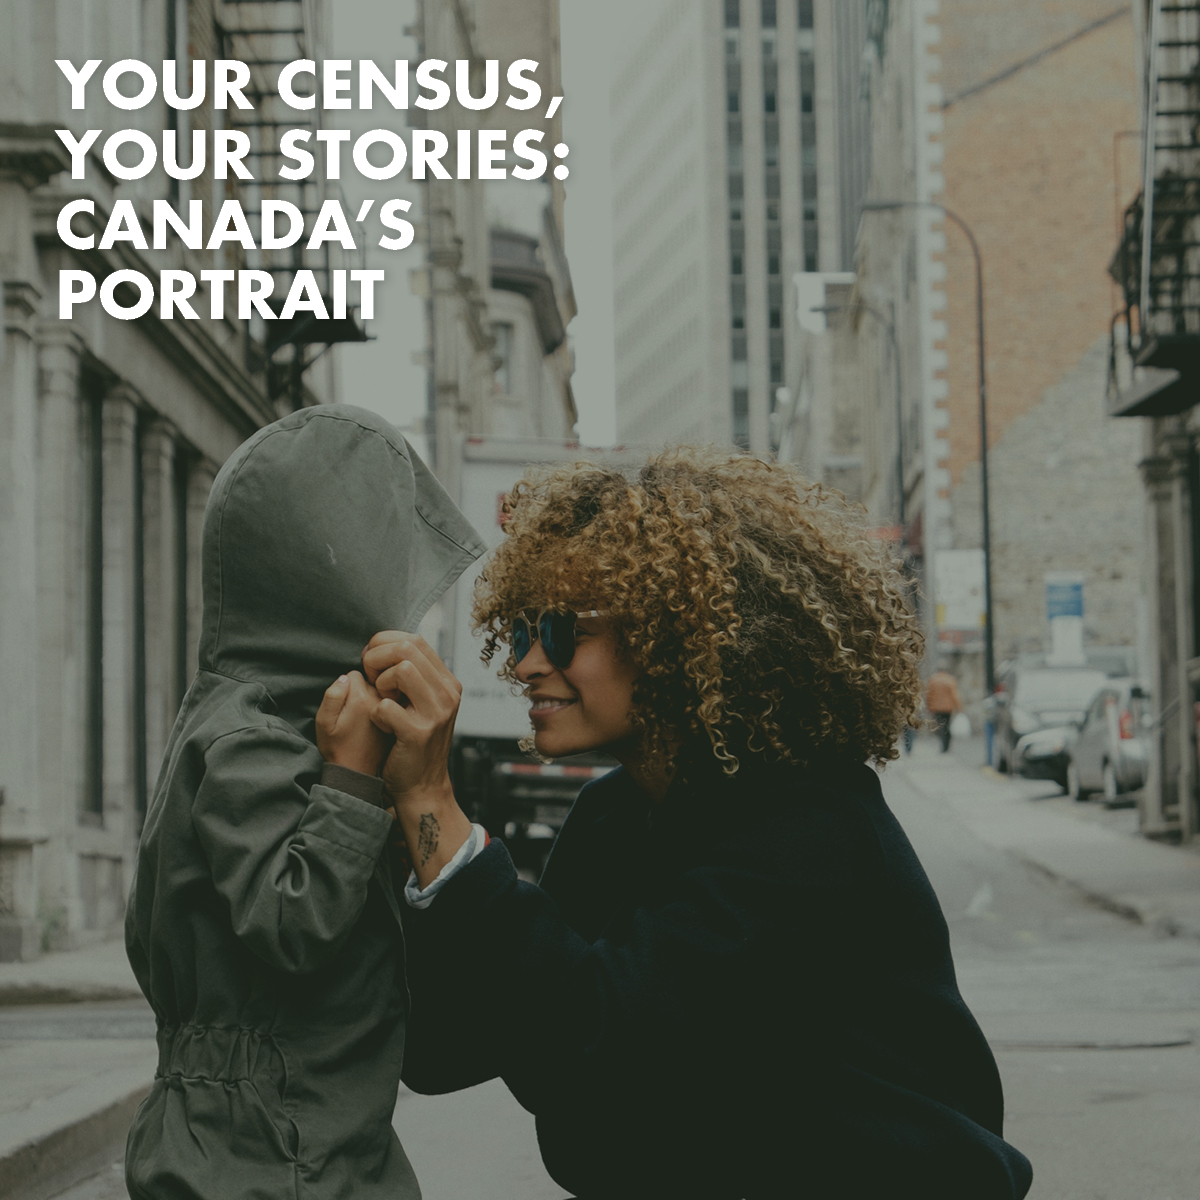 Woman and child holding hands in the street Text overlay says "Your census, your stories: Canada's portrait"